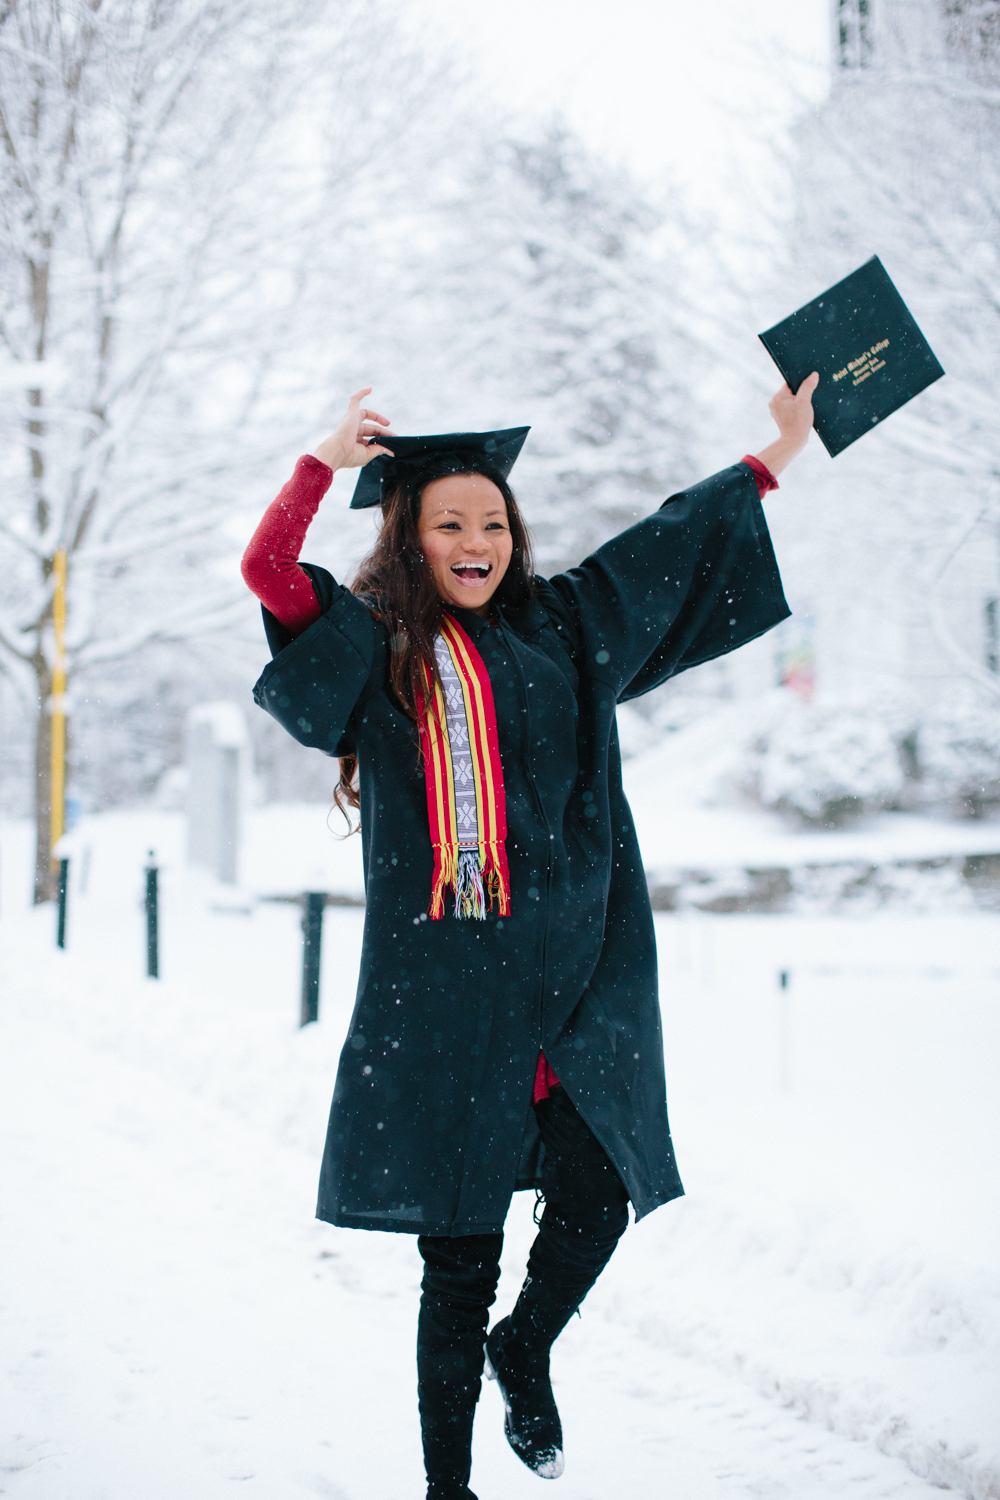 Raina, wearing a cap and gown, dancing in the snow with her diploma